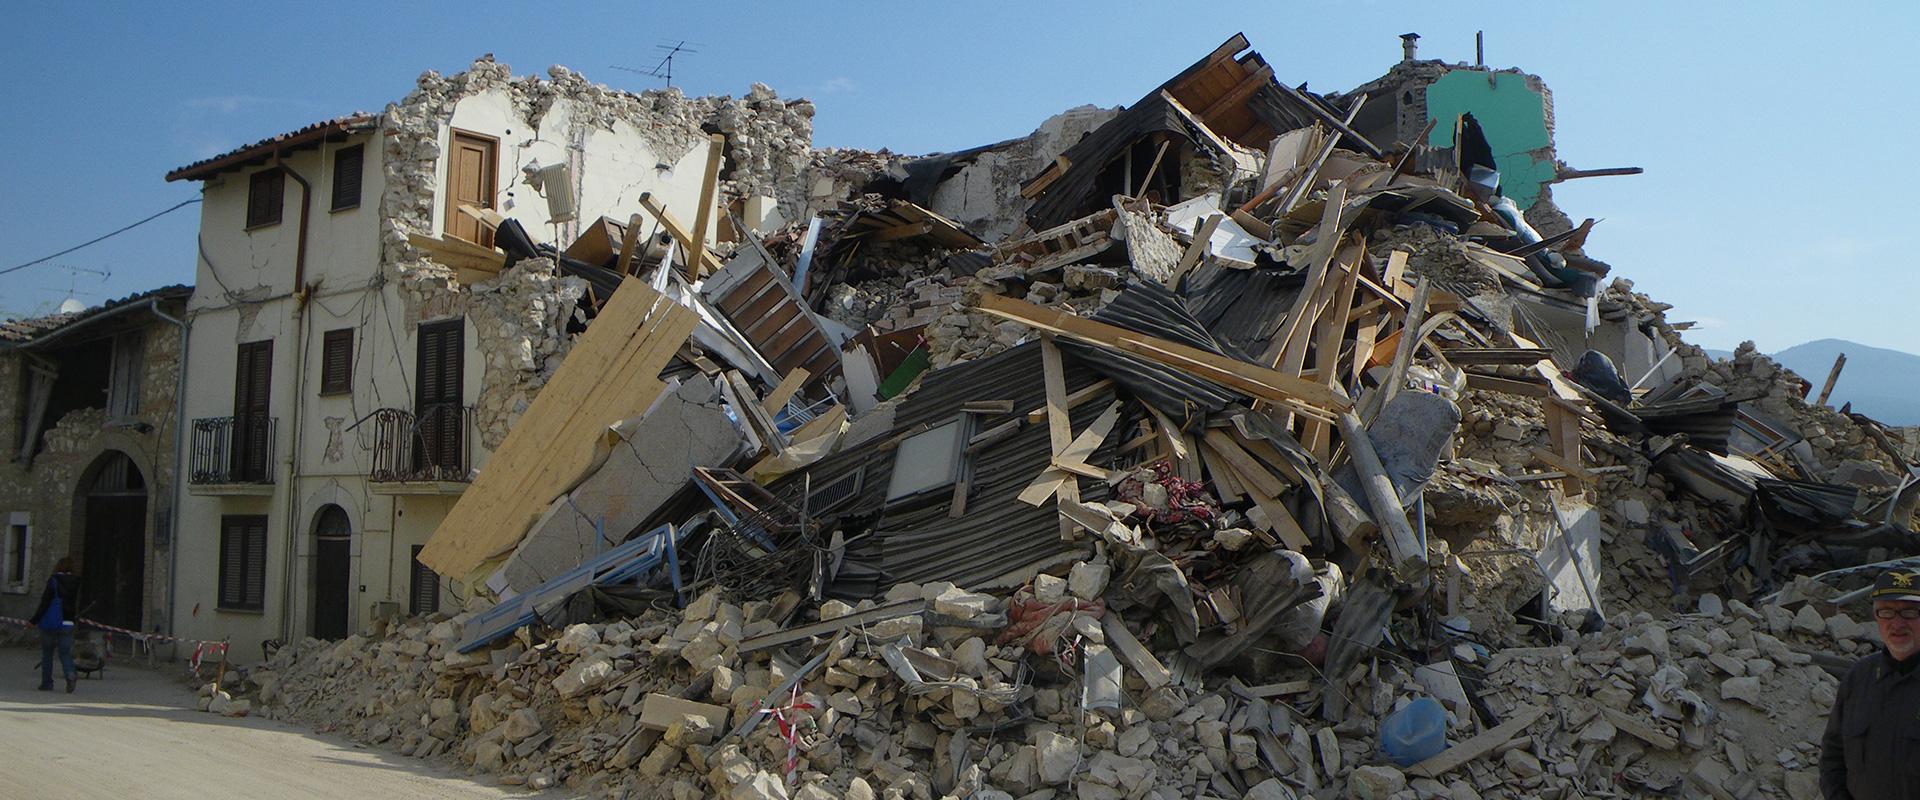 Houses destroyed by the earthquake in the Abruzzo region, Italy